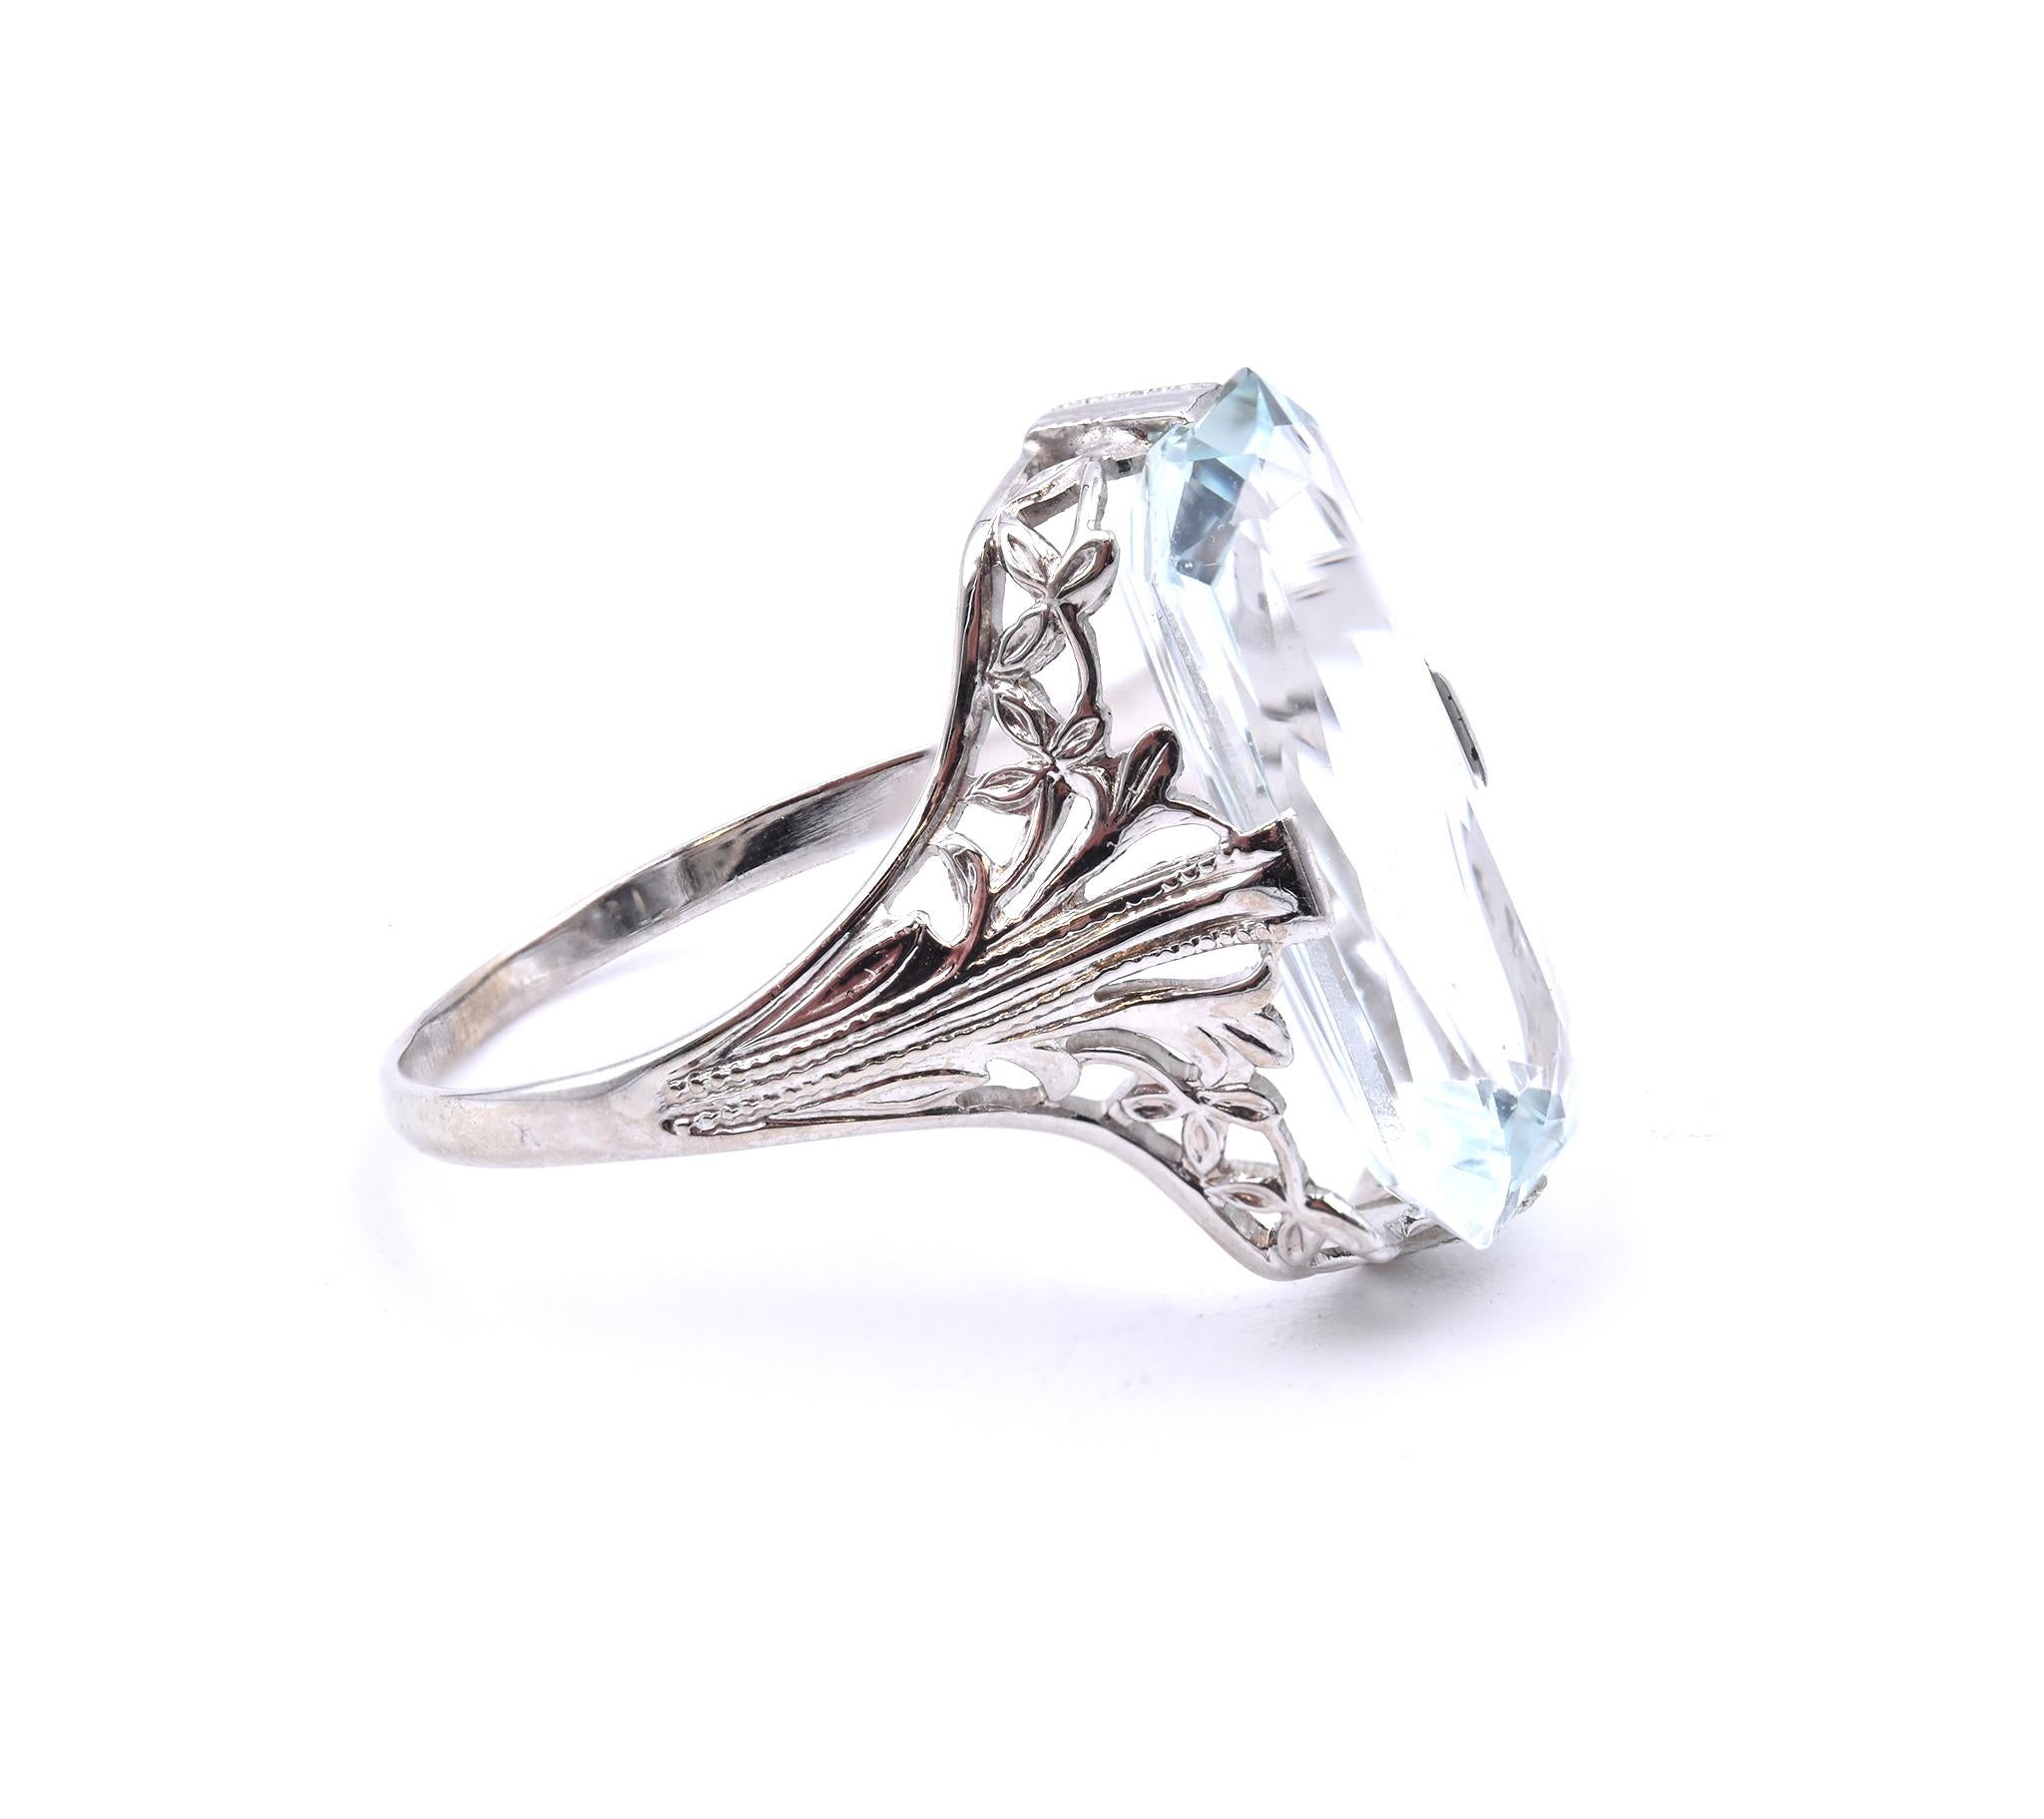 Designer: custom
Material: 14K white gold 
Aquamarine: 1 rectangular cushion cut = 3.23ct 
Ring Size: 6.25 (please allow up to 2 additional business days for sizing requests)
Dimensions: ring shank measures 1.45mm
Weight:  2.29 grams